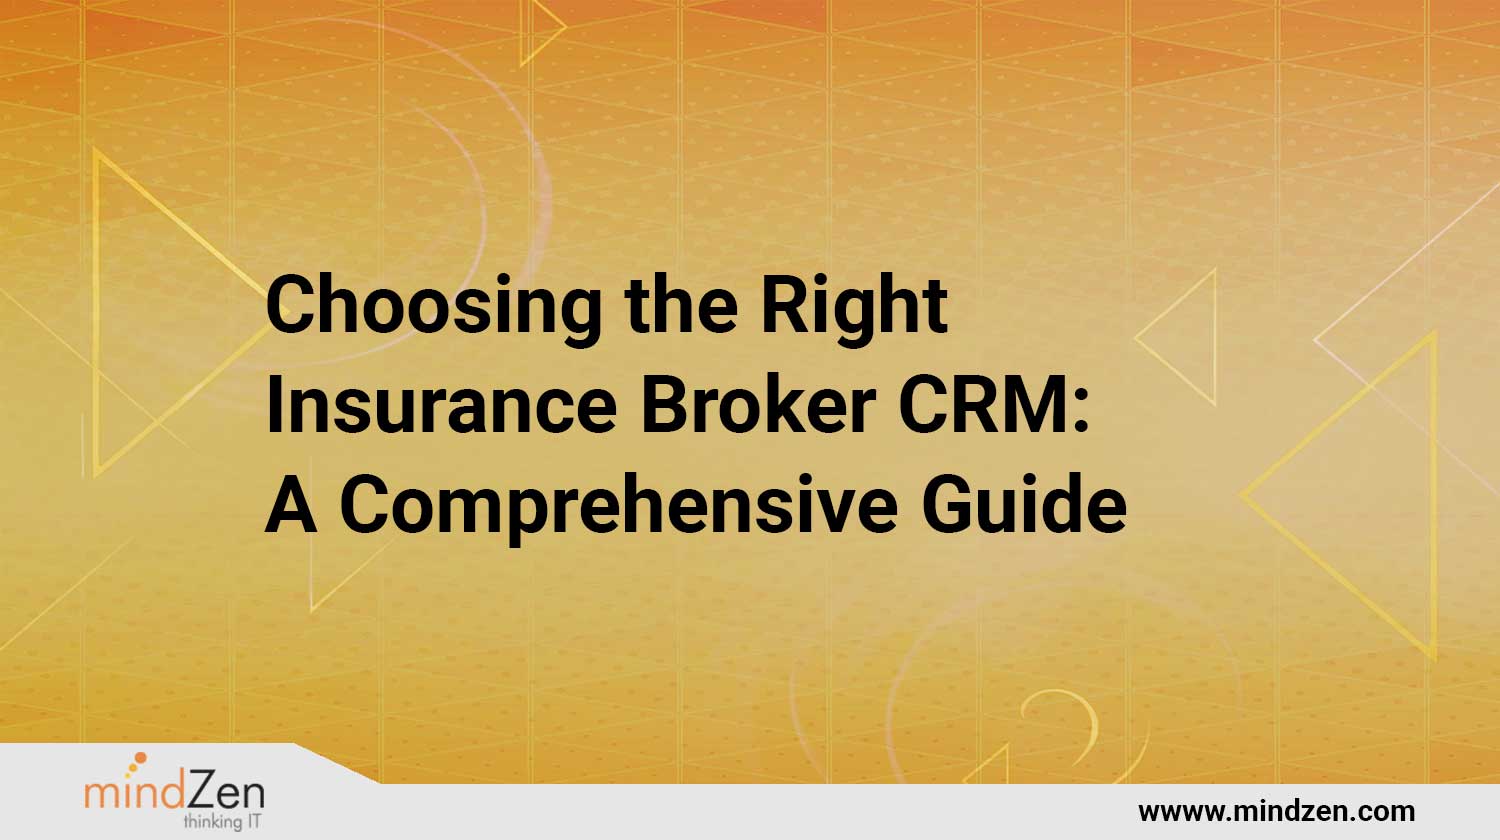 Choosing the Right Insurance Broker CRM: A Comprehensive Guide
